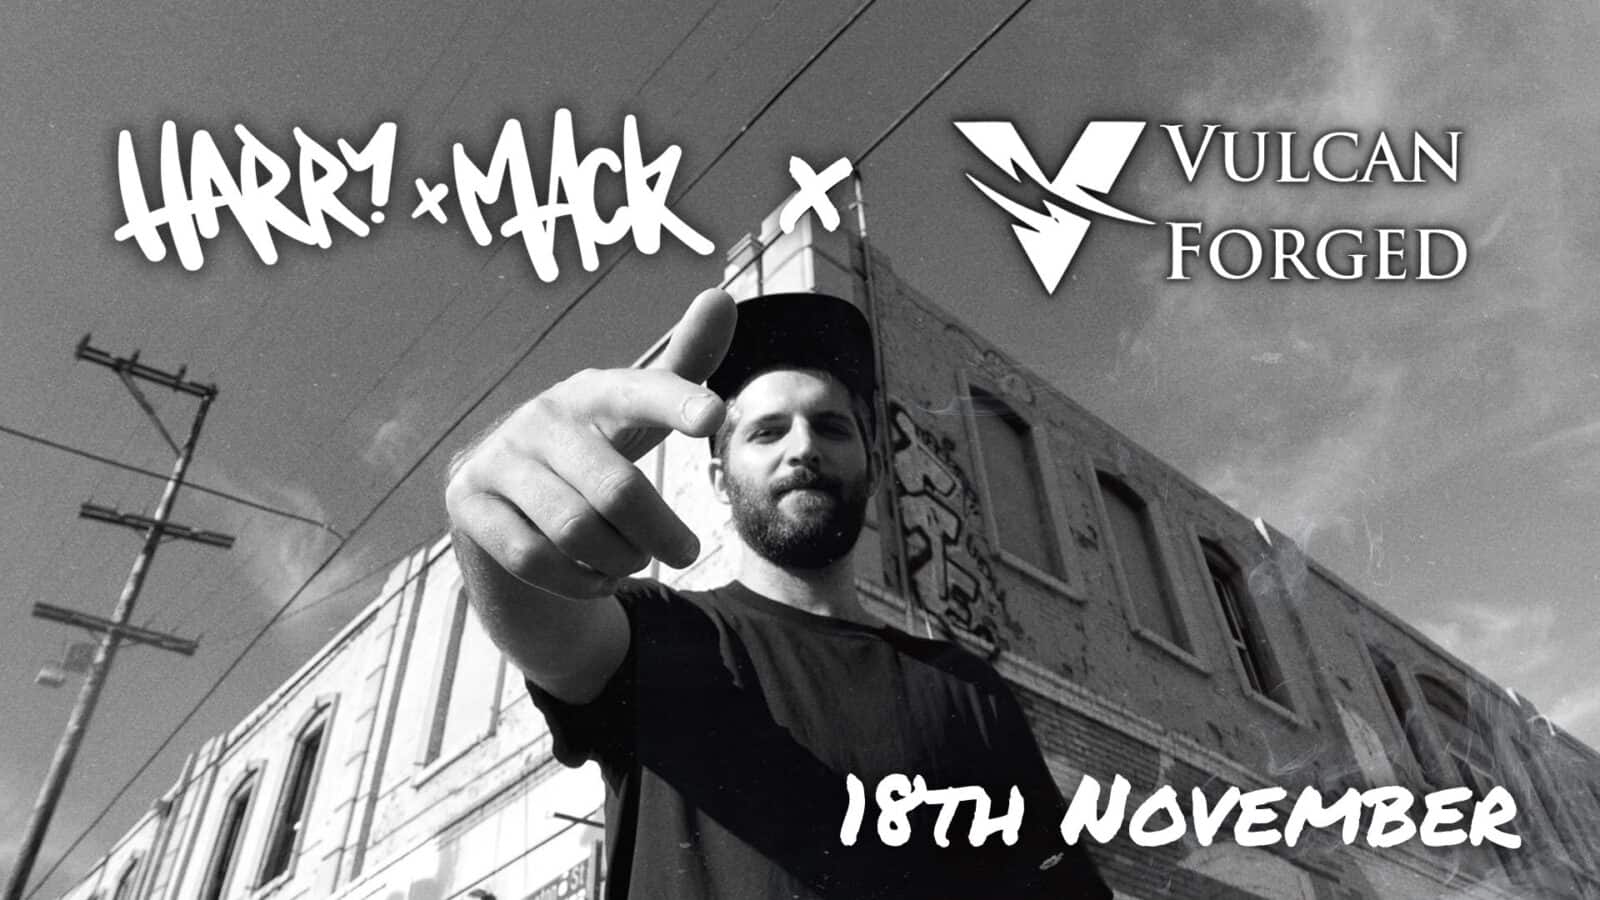 Freestyle Legend Harry Mack to Perform Tonight At the Vulcan Forged Discord Server